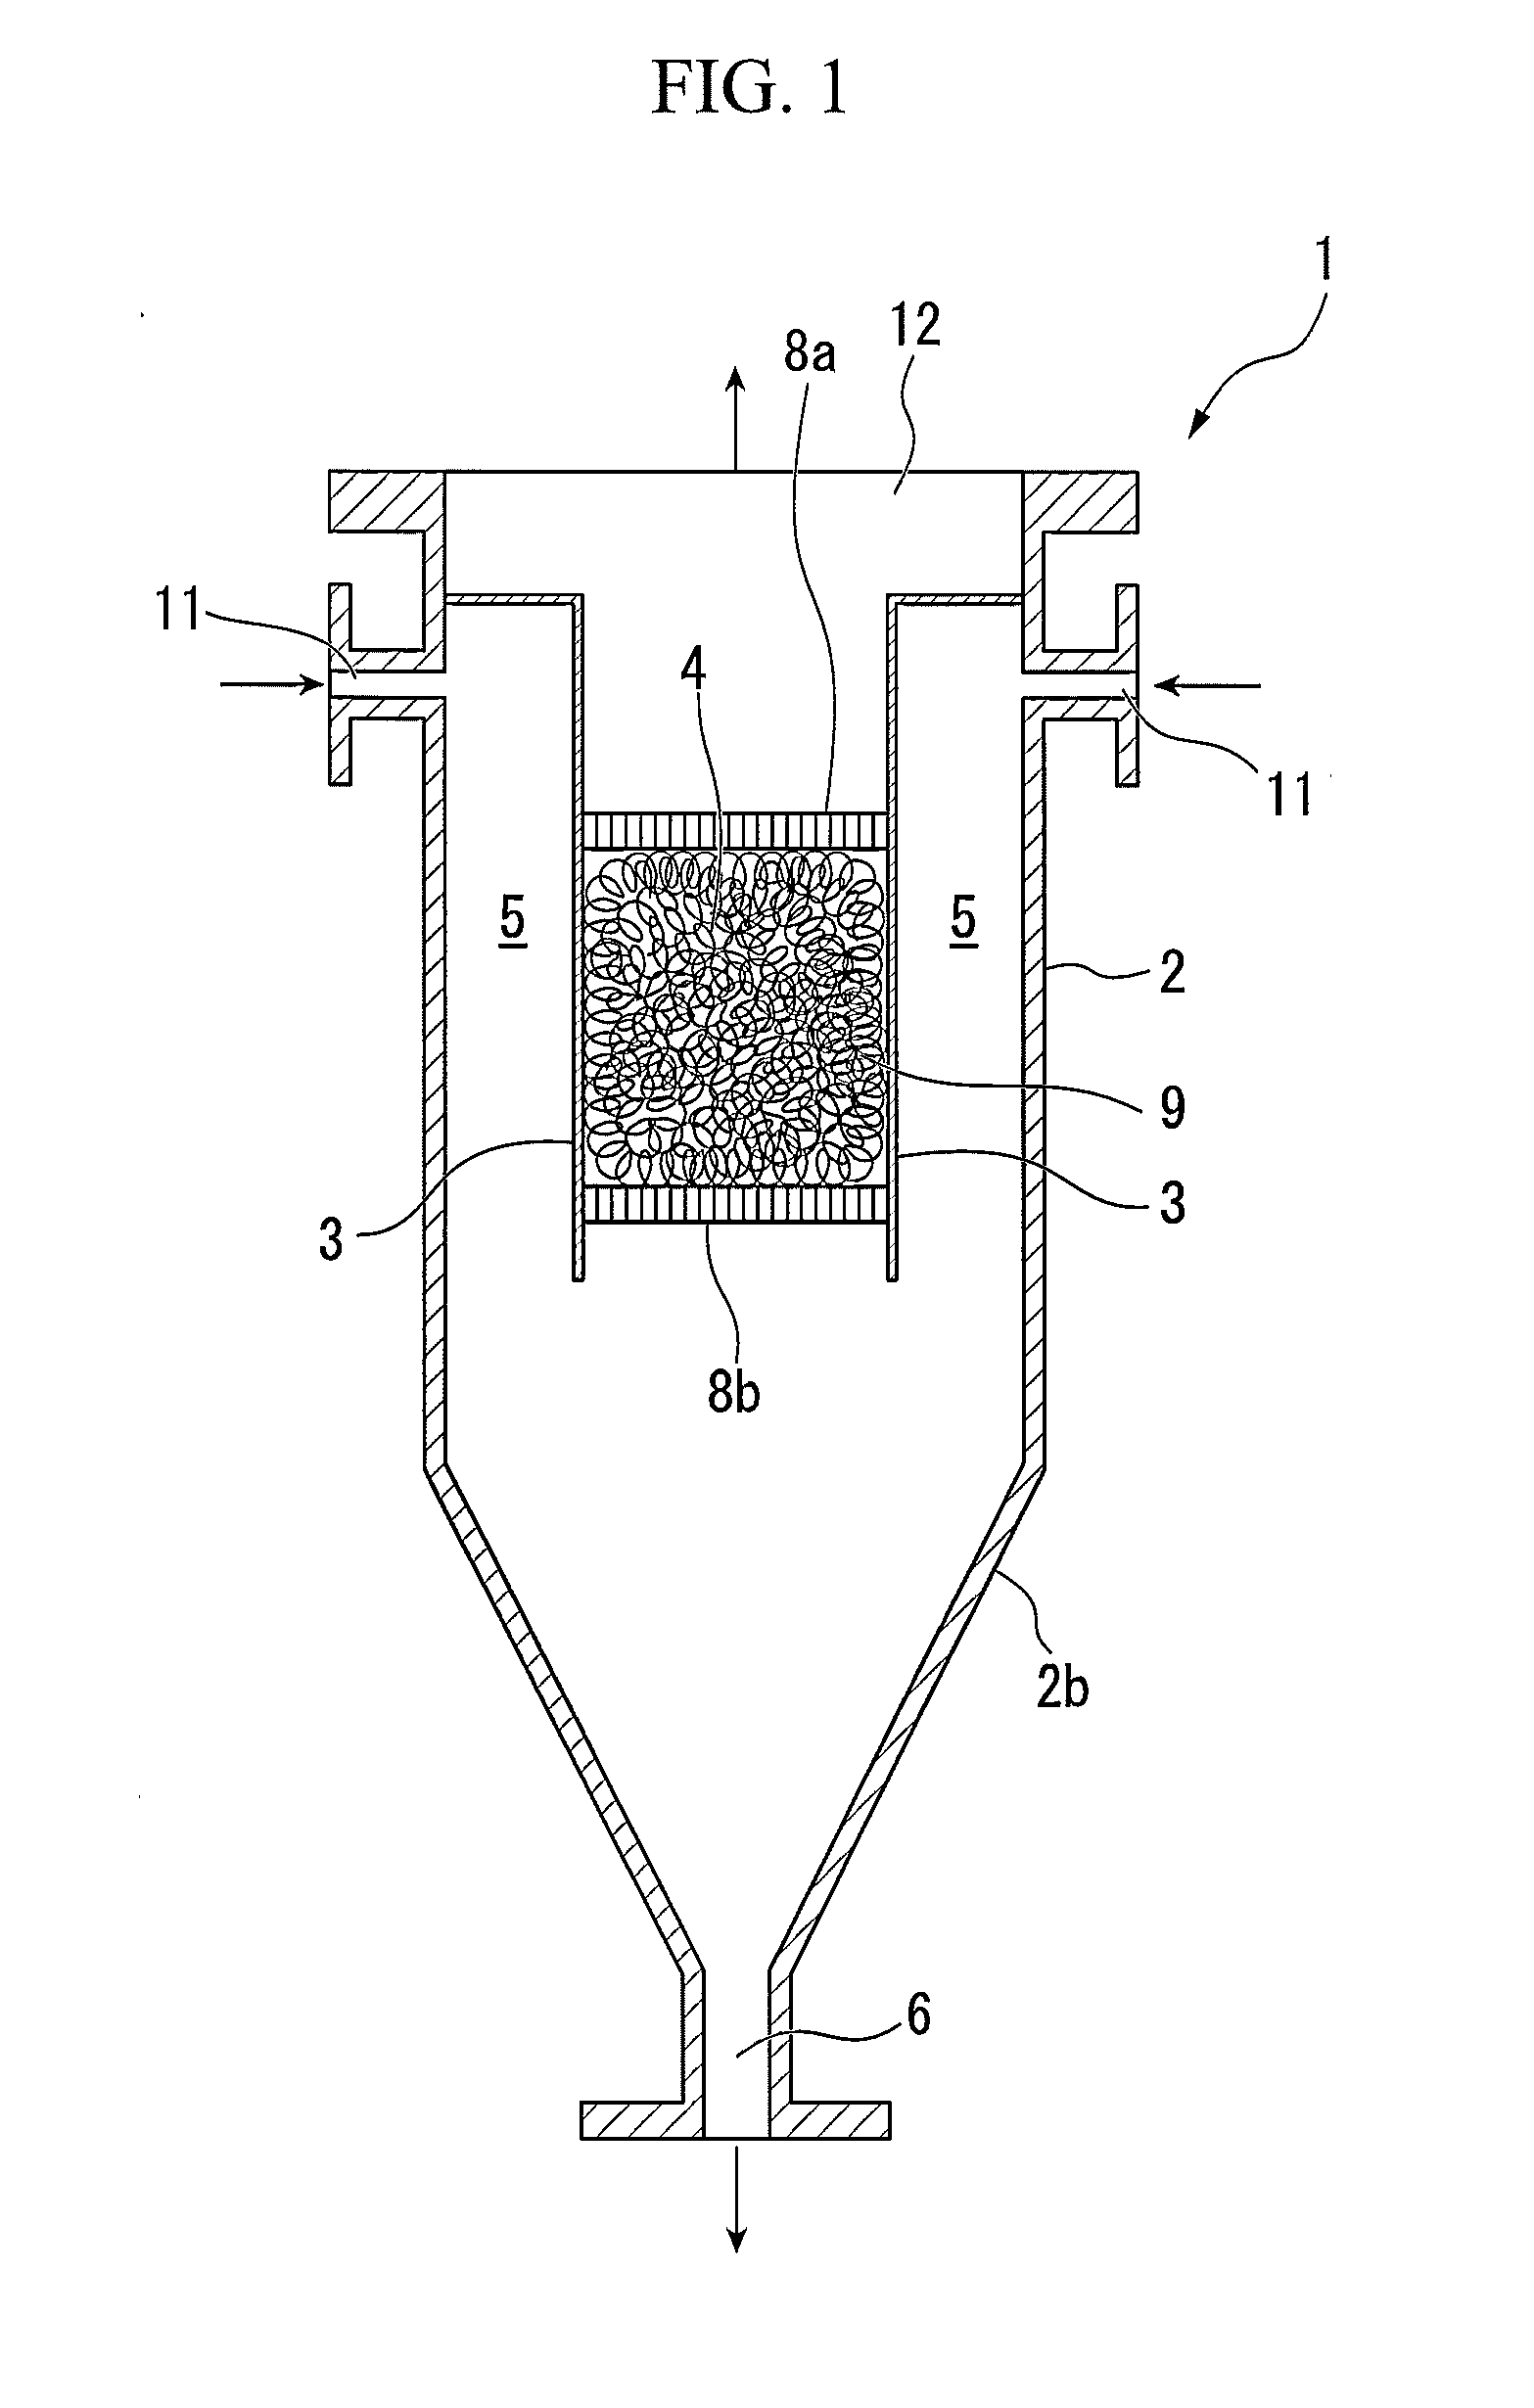 Magnetic-separation filter device